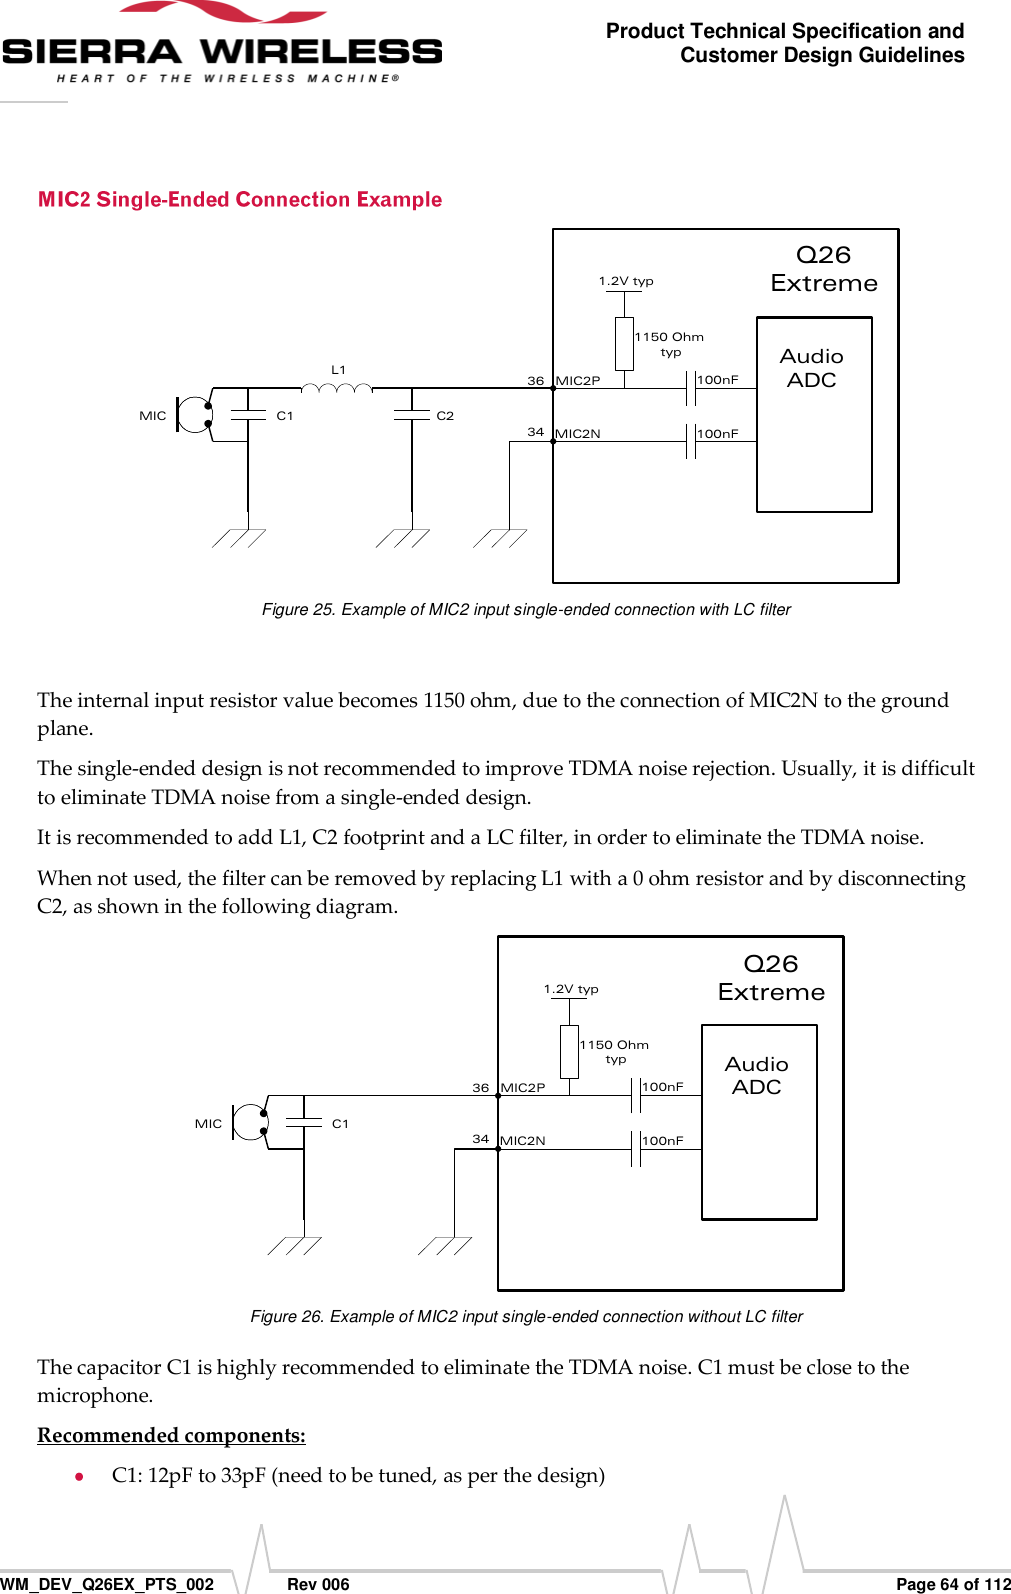      WM_DEV_Q26EX_PTS_002  Rev 006  Page 64 of 112 Product Technical Specification and Customer Design Guidelines 3634C1MICAudioADC1150 Ohm typ1.2V typ100nF100nFMIC2PMIC2NL1C2Q26 Extreme Figure 25. Example of MIC2 input single-ended connection with LC filter  The internal input resistor value becomes 1150 ohm, due to the connection of MIC2N to the ground plane. The single-ended design is not recommended to improve TDMA noise rejection. Usually, it is difficult to eliminate TDMA noise from a single-ended design. It is recommended to add L1, C2 footprint and a LC filter, in order to eliminate the TDMA noise. When not used, the filter can be removed by replacing L1 with a 0 ohm resistor and by disconnecting C2, as shown in the following diagram. 3634C1MICAudioADC1150 Ohm typ1.2V typ100nF100nFMIC2PMIC2NQ26 Extreme Figure 26. Example of MIC2 input single-ended connection without LC filter The capacitor C1 is highly recommended to eliminate the TDMA noise. C1 must be close to the microphone. Recommended components:  C1: 12pF to 33pF (need to be tuned, as per the design) 